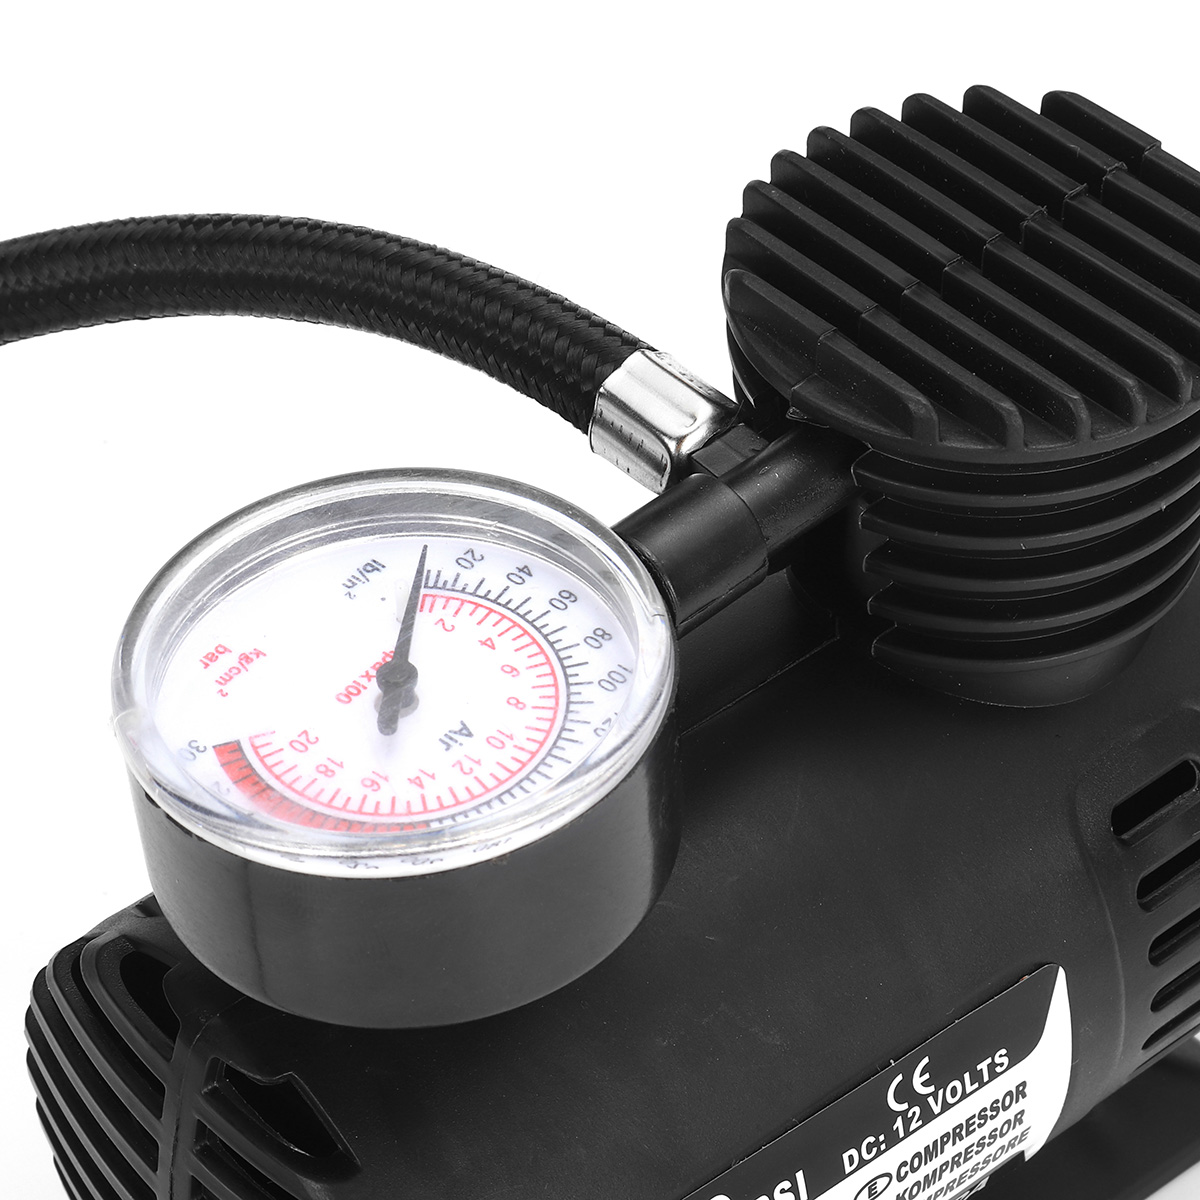 DC-12V-300PSI-Car-Air-Compressor-Portable-Tire-Inflator-Air-Pump-For-Motorcycle-Car-Auto-Bicycle-1715750-10